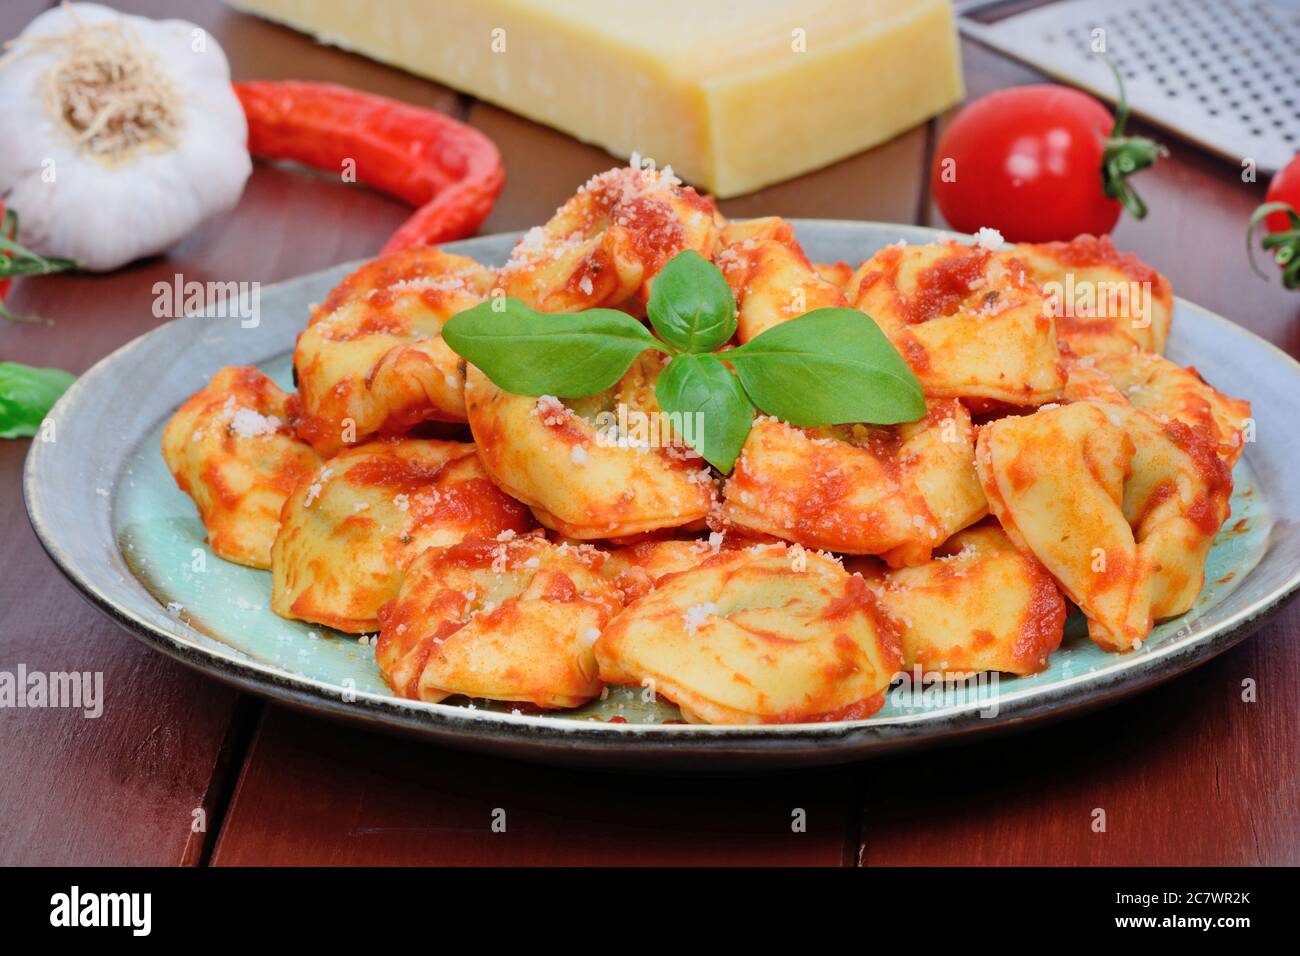 Tortellini with tomatoes sauce in a plate on brown wooden table Stock Photo